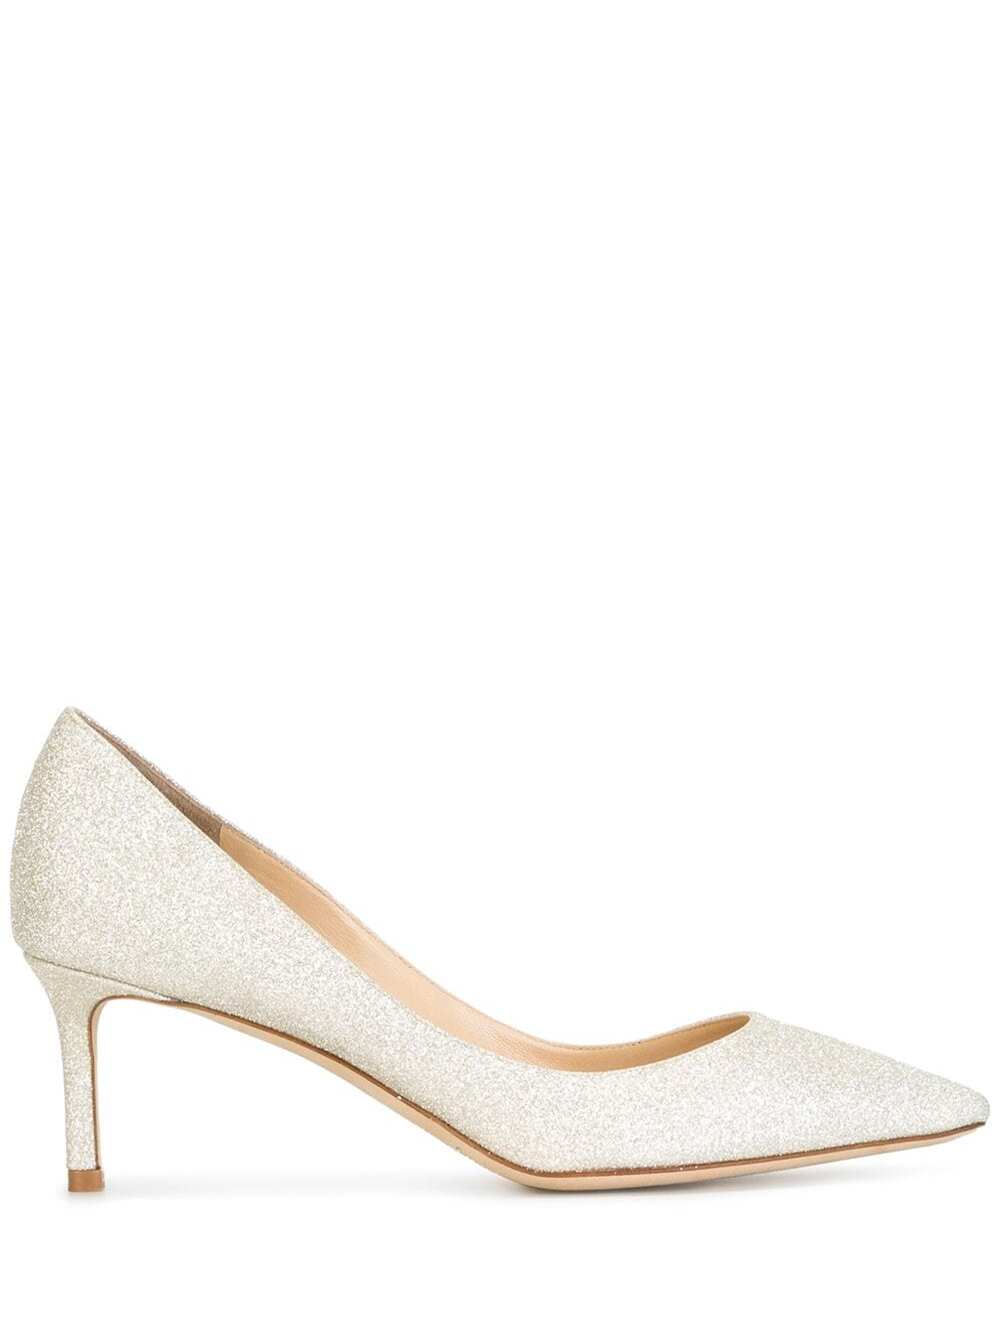 JIMMY CHOO ROMY WHITE PUMPS WITH ALL-OBVER GLITTER EMBELLISHMENT IN TEXTILE WOMAN